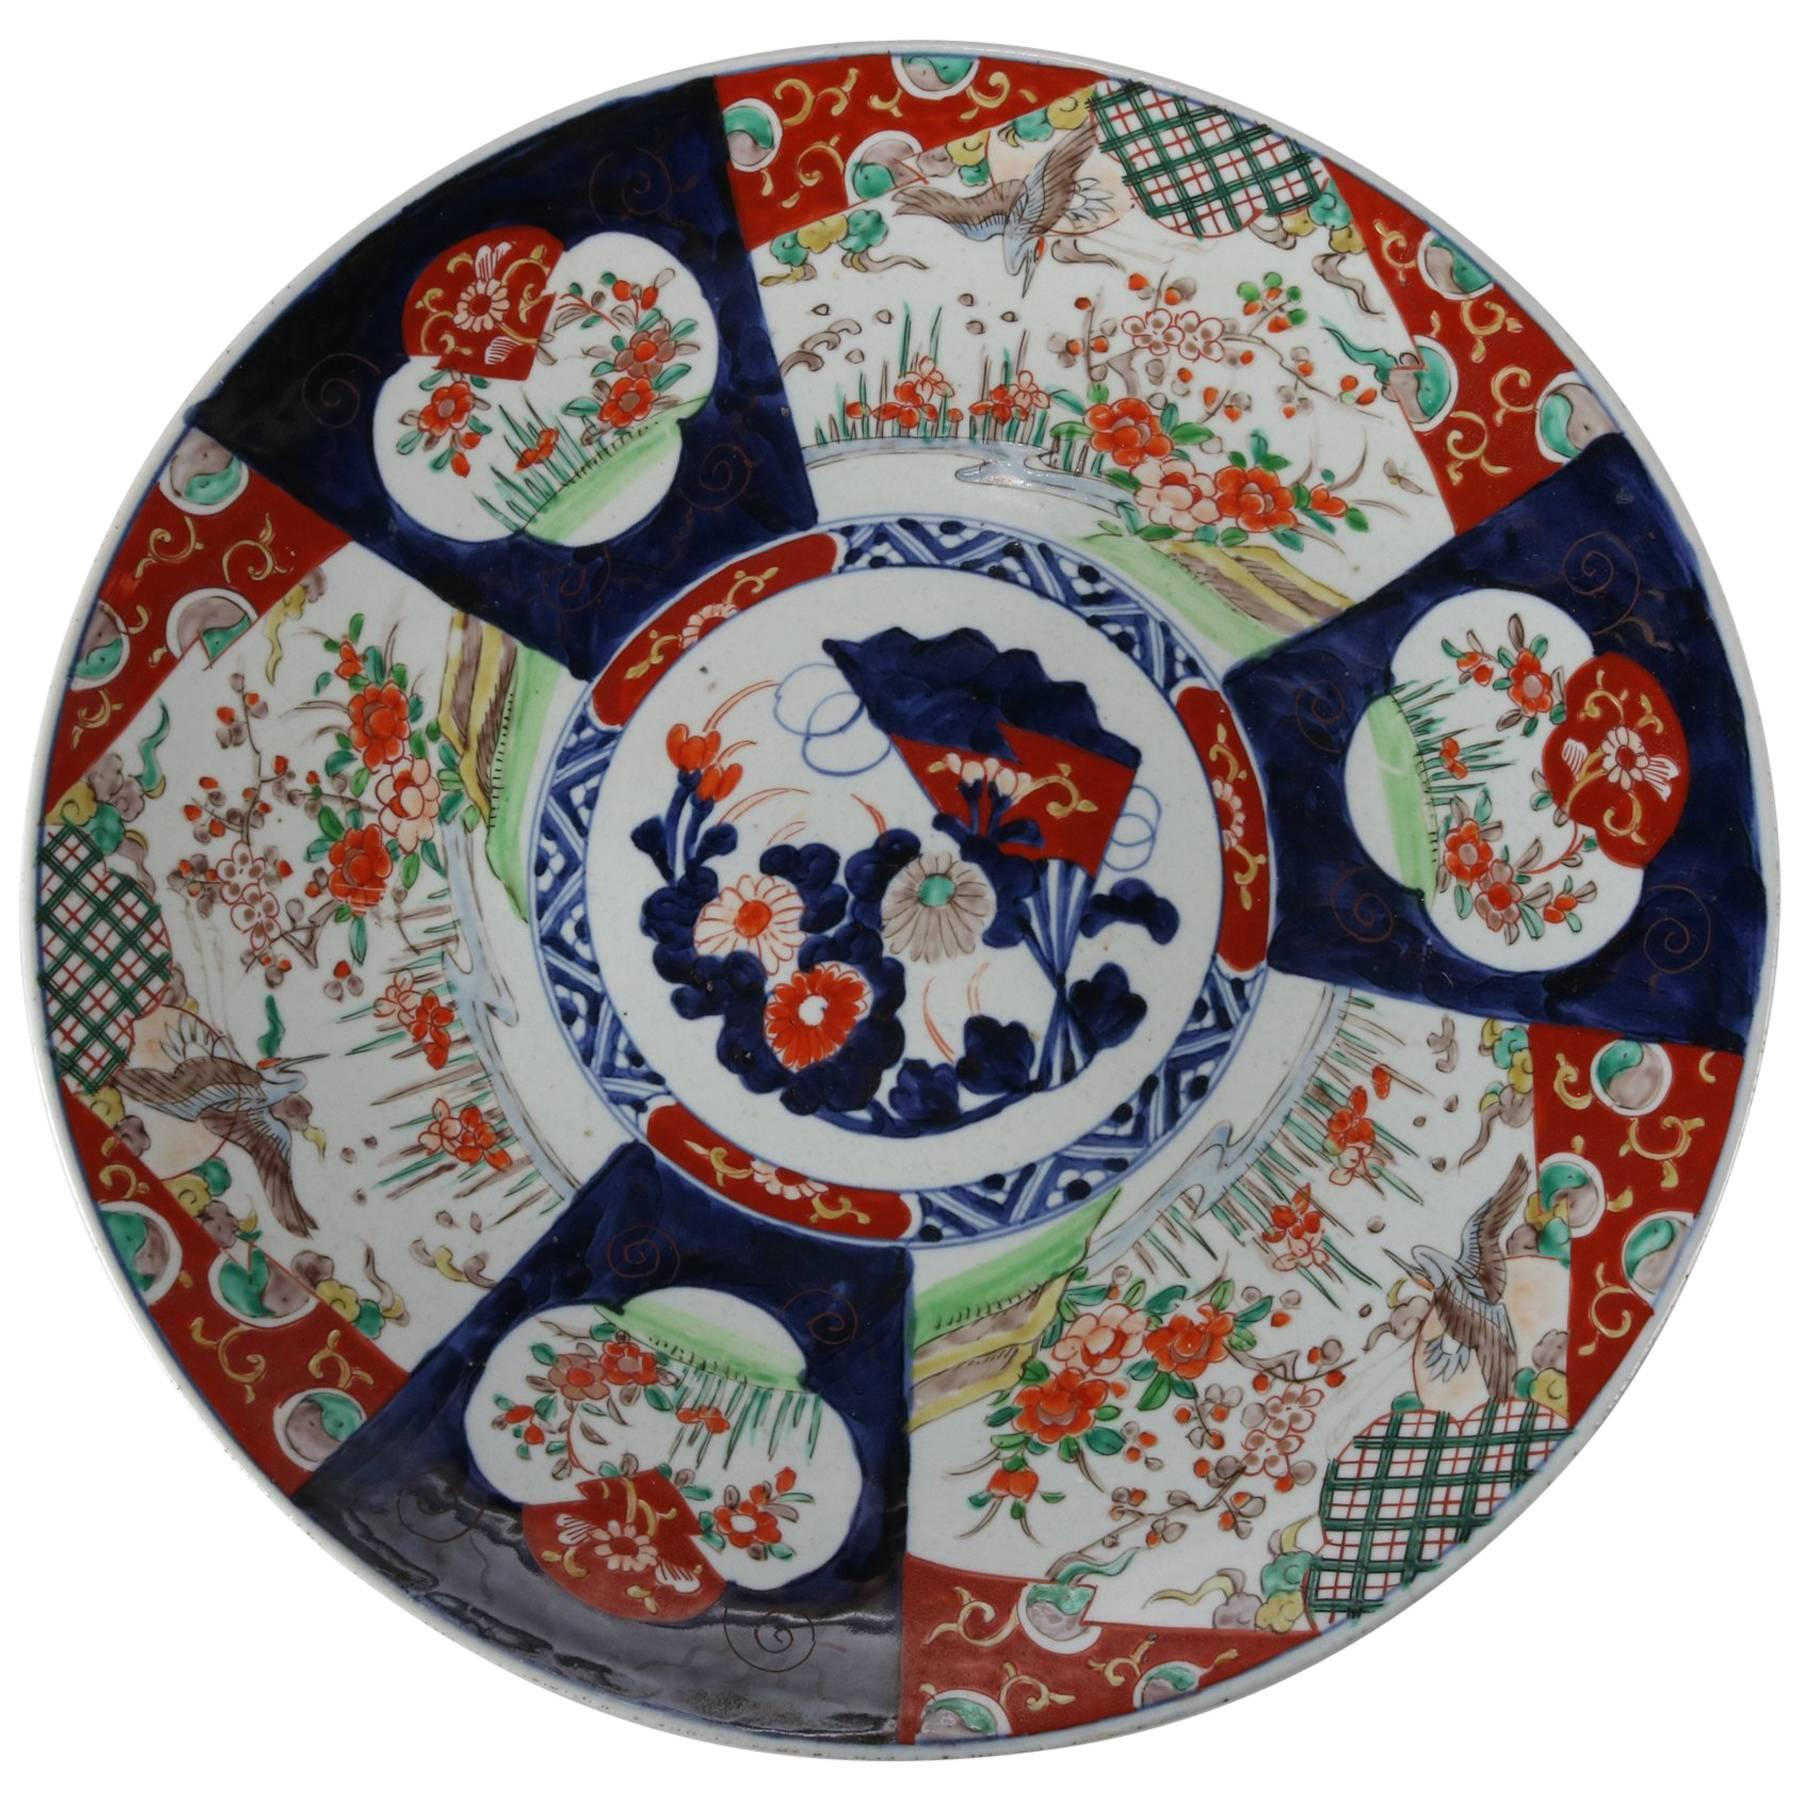 Antique Japanese Imari Porcelain Charger, Floral and Herons, 19th Century